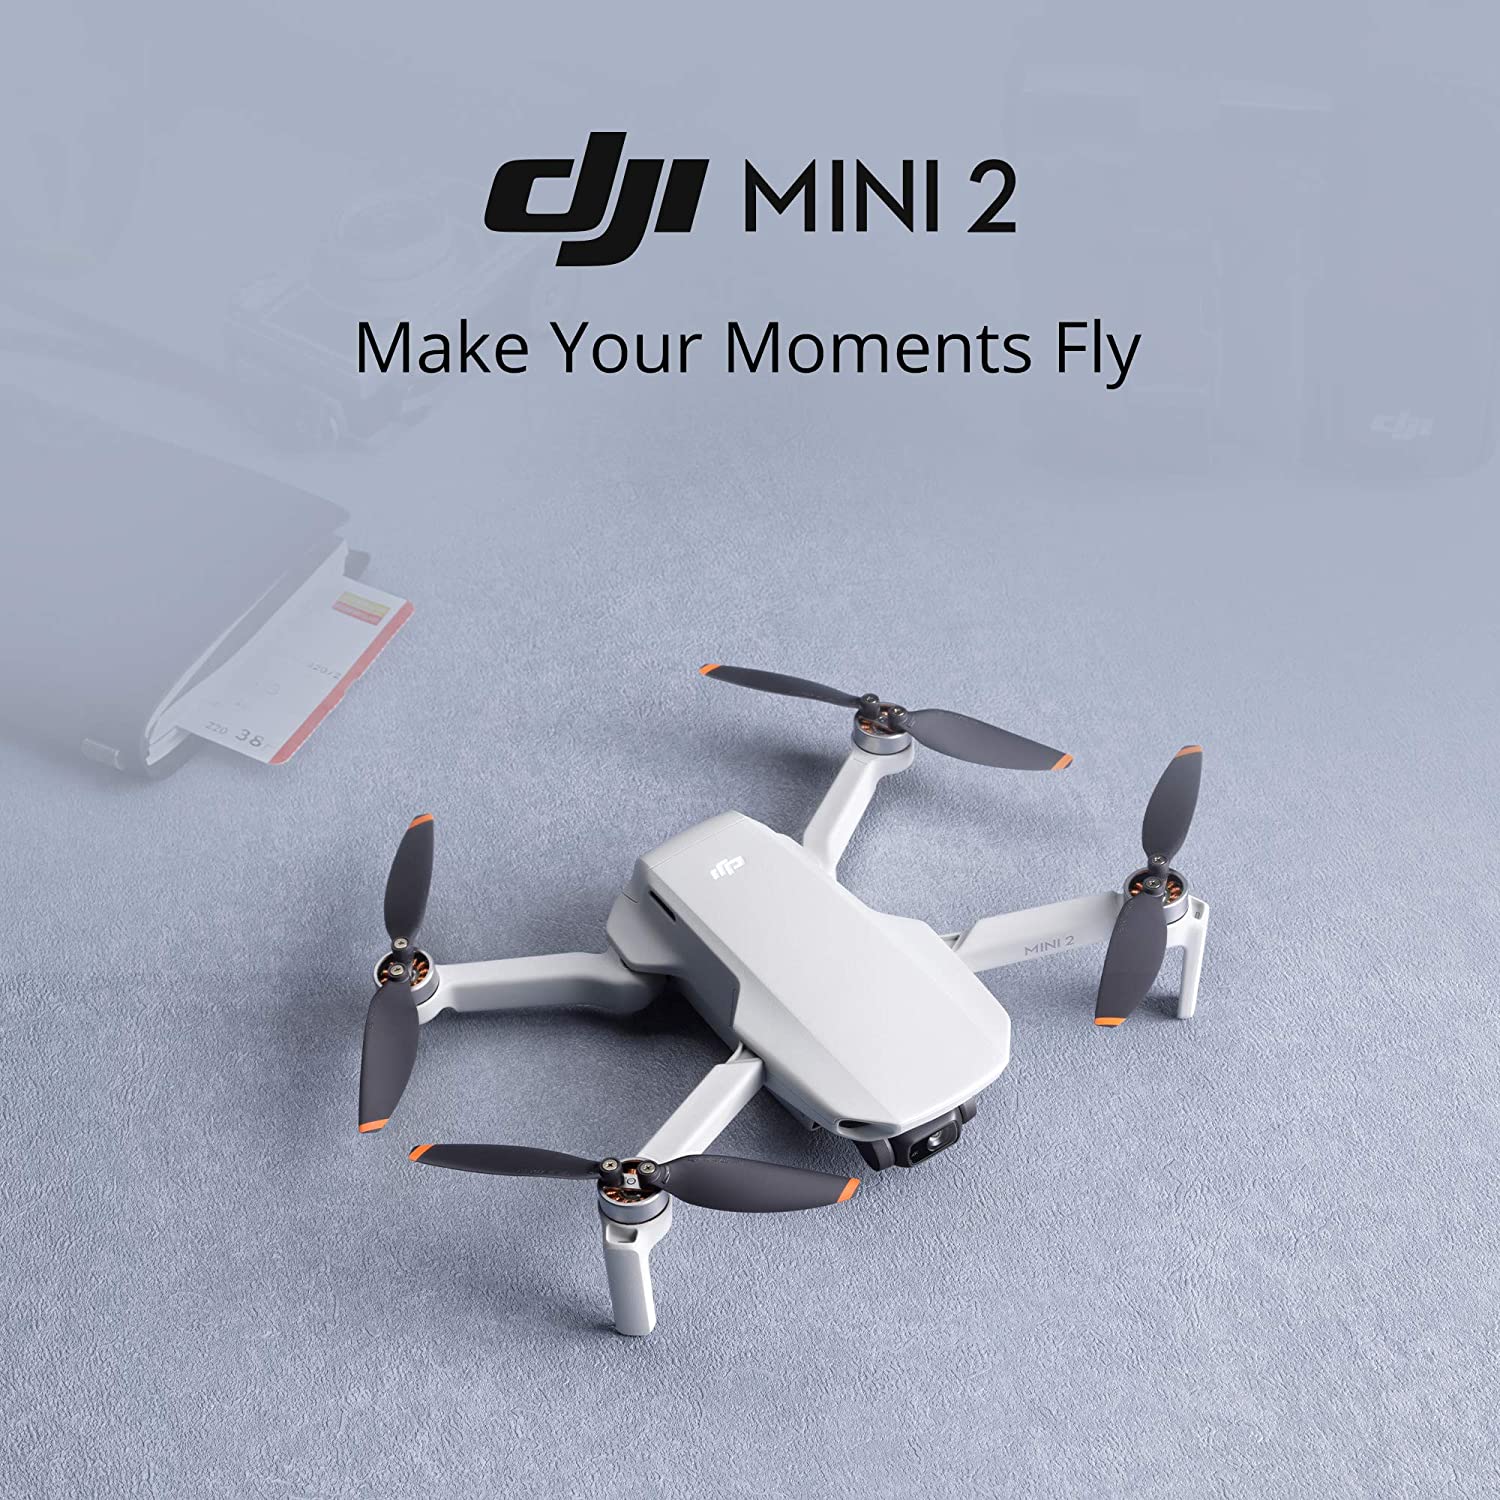  DJI Mini 2 – Ultralight and Foldable Drone Quadcopter, 3-Axis  Gimbal with 4K Camera, 12MP Photo, 31 Mins Flight Time, OcuSync 2.0 10km HD  Video Transmission, QuickShots, Gray : Toys & Games